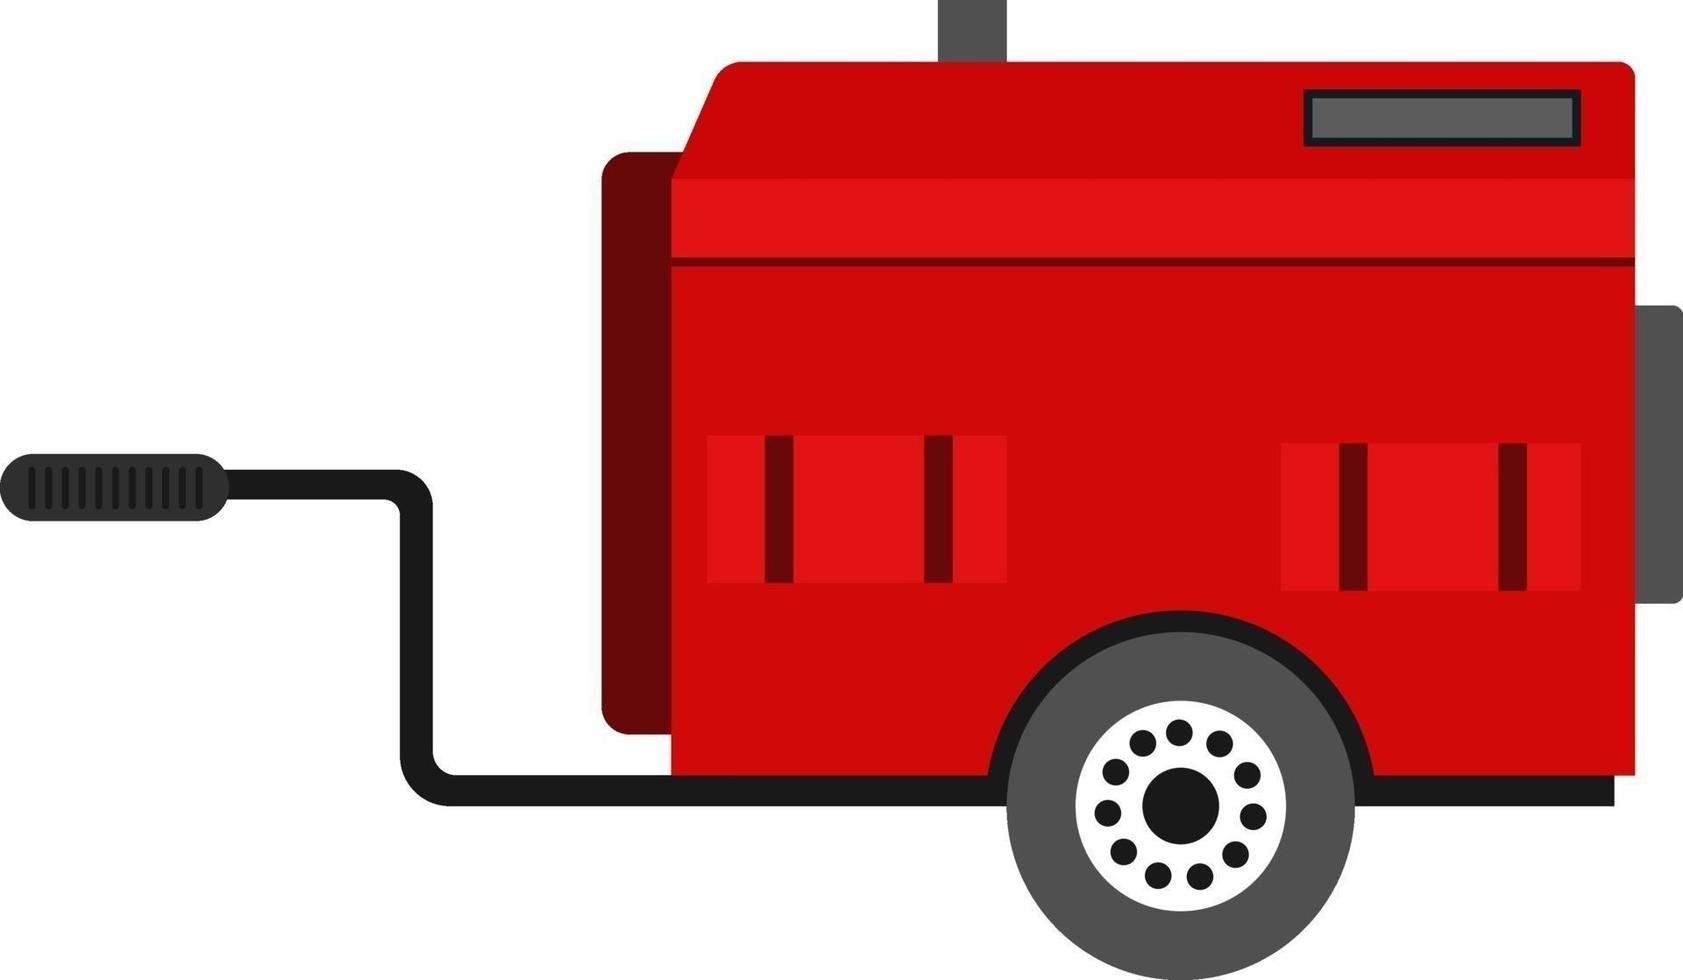 Mobile generator, illustration, vector on a white background.